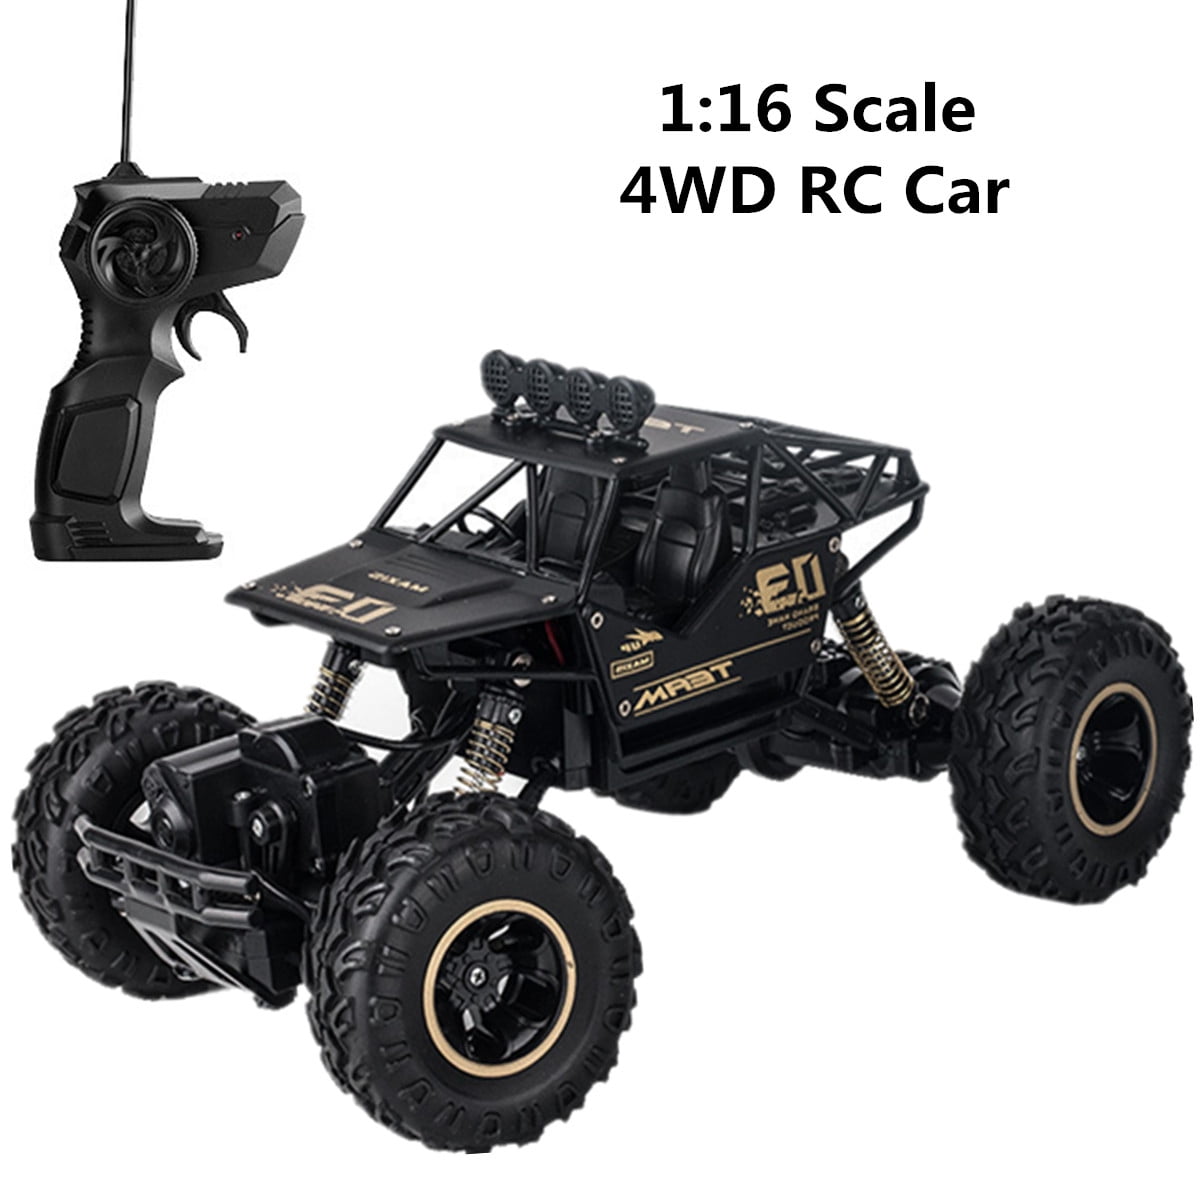 1/16 RC Car 4WD Remote Control Jeep Off-Road Truck All Terrain Vehicle Kids Toy 